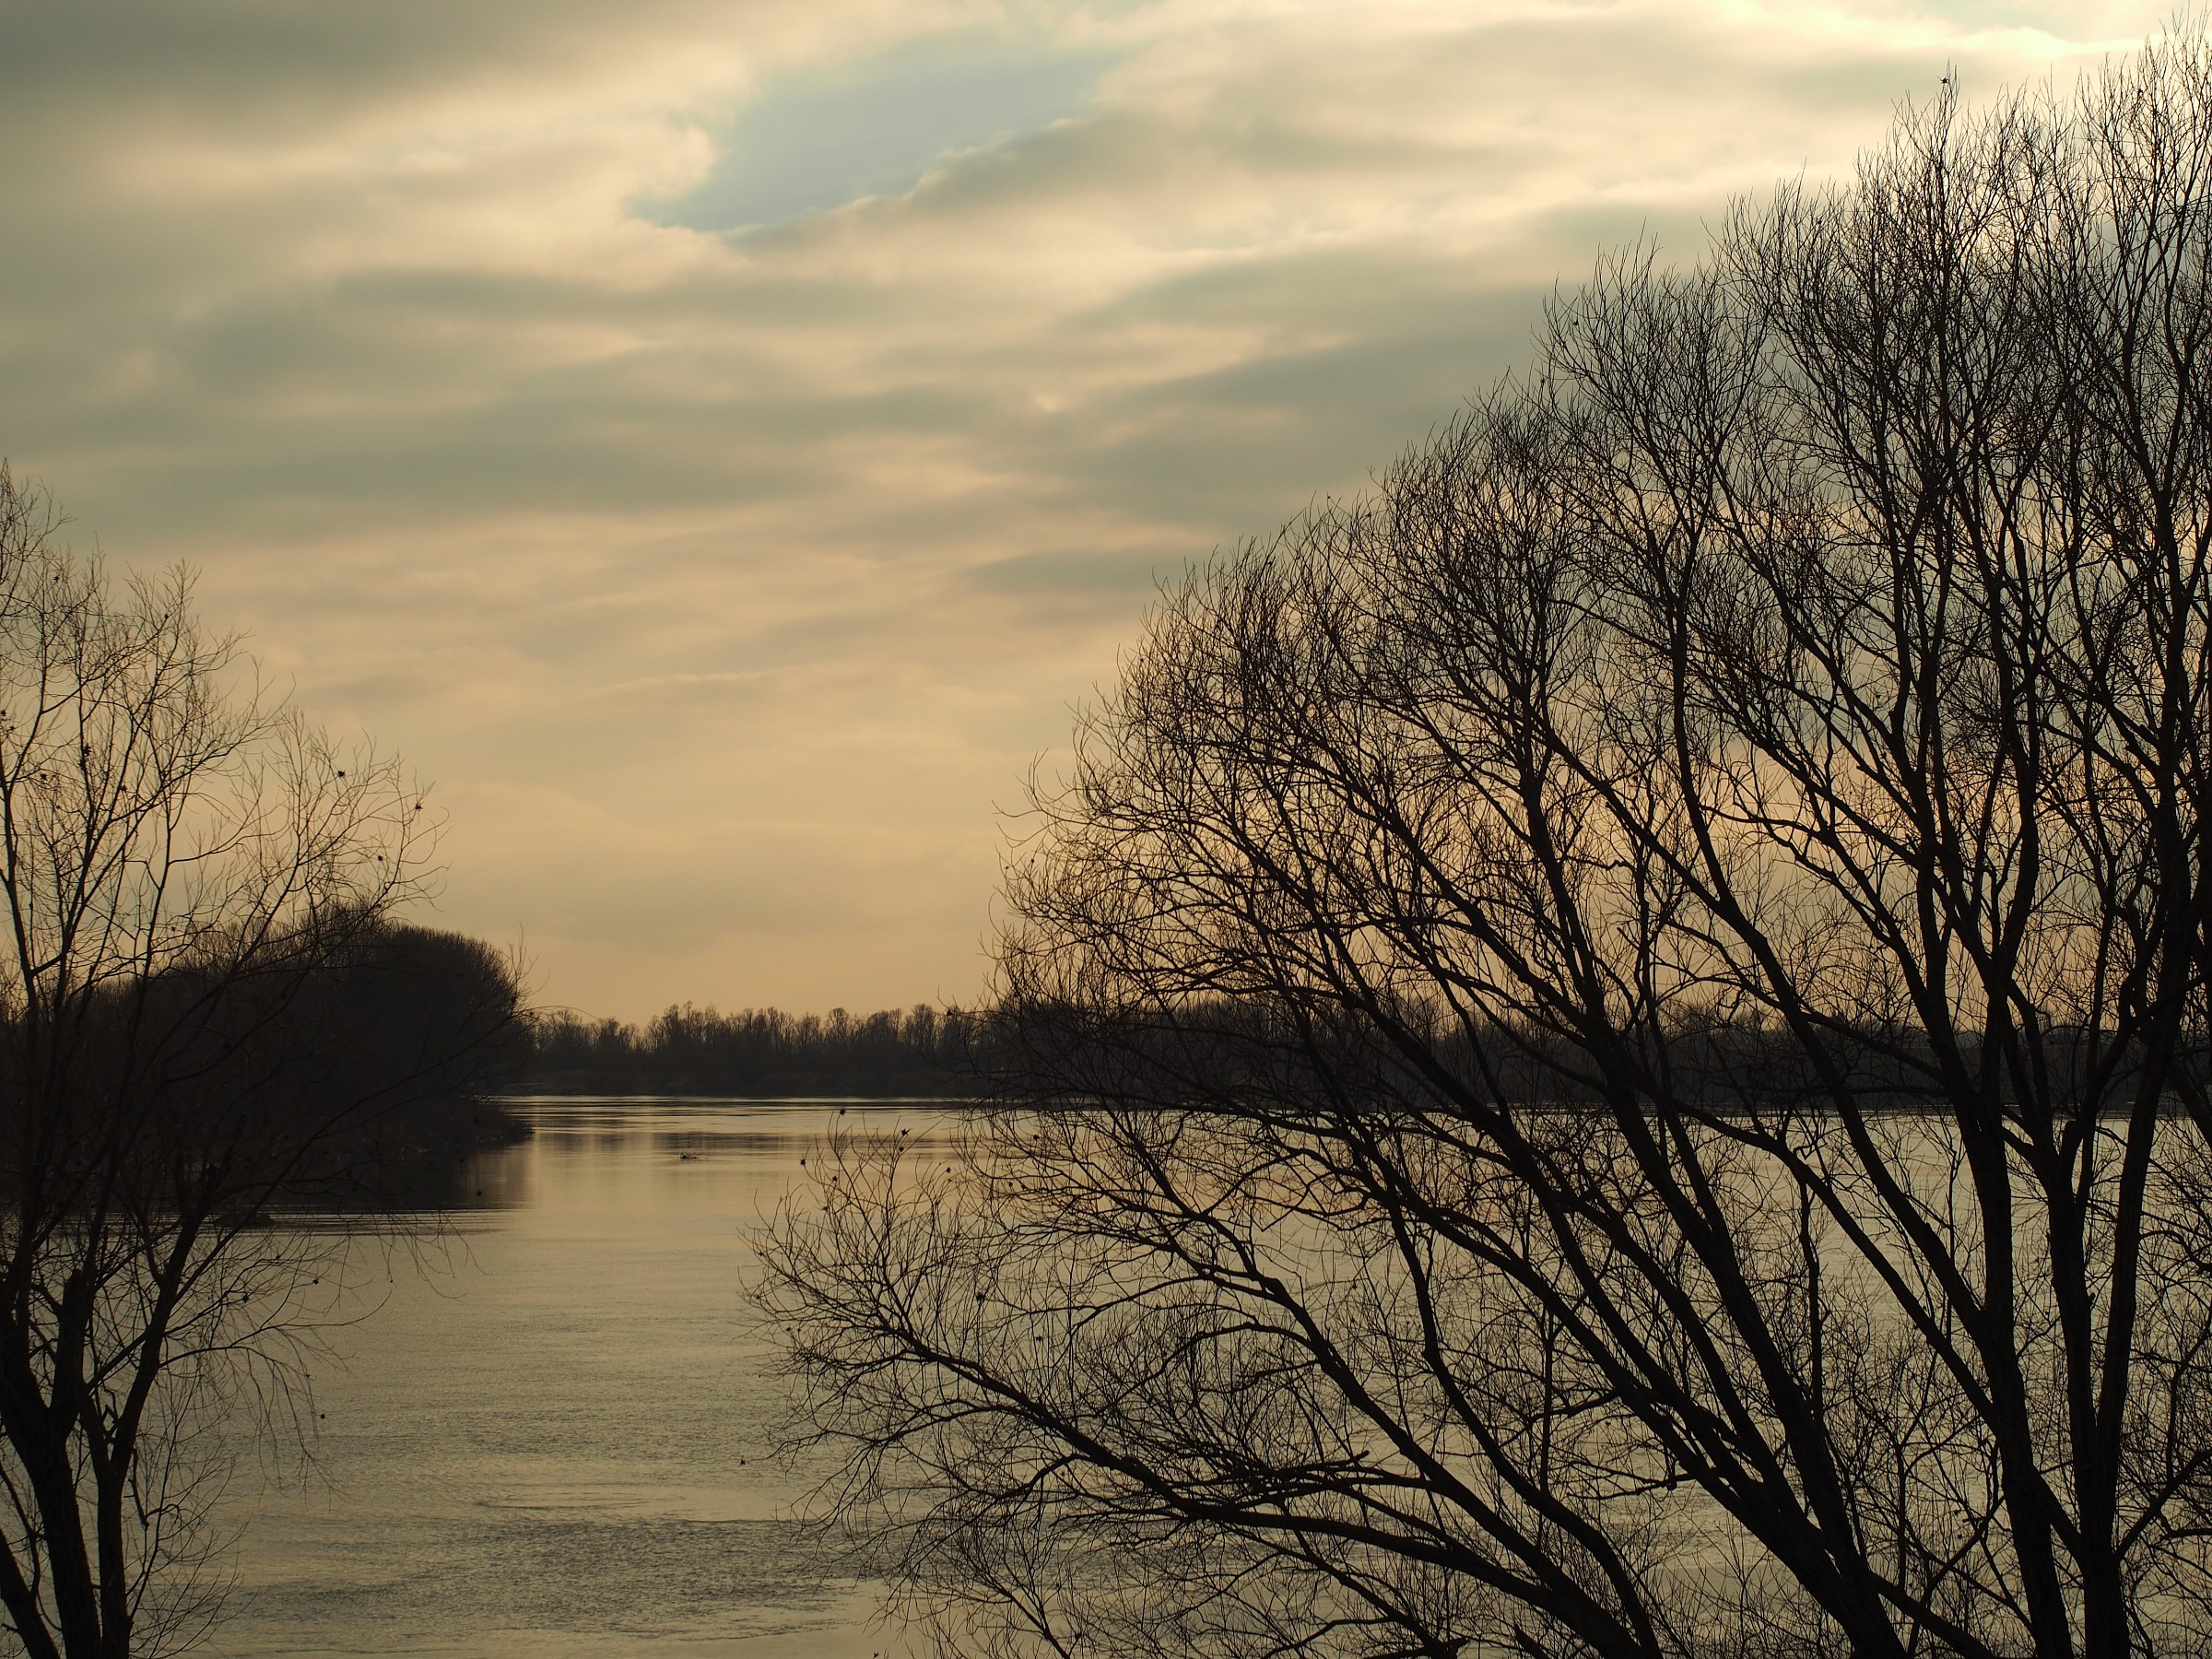 The largest river in a winter afternoon...